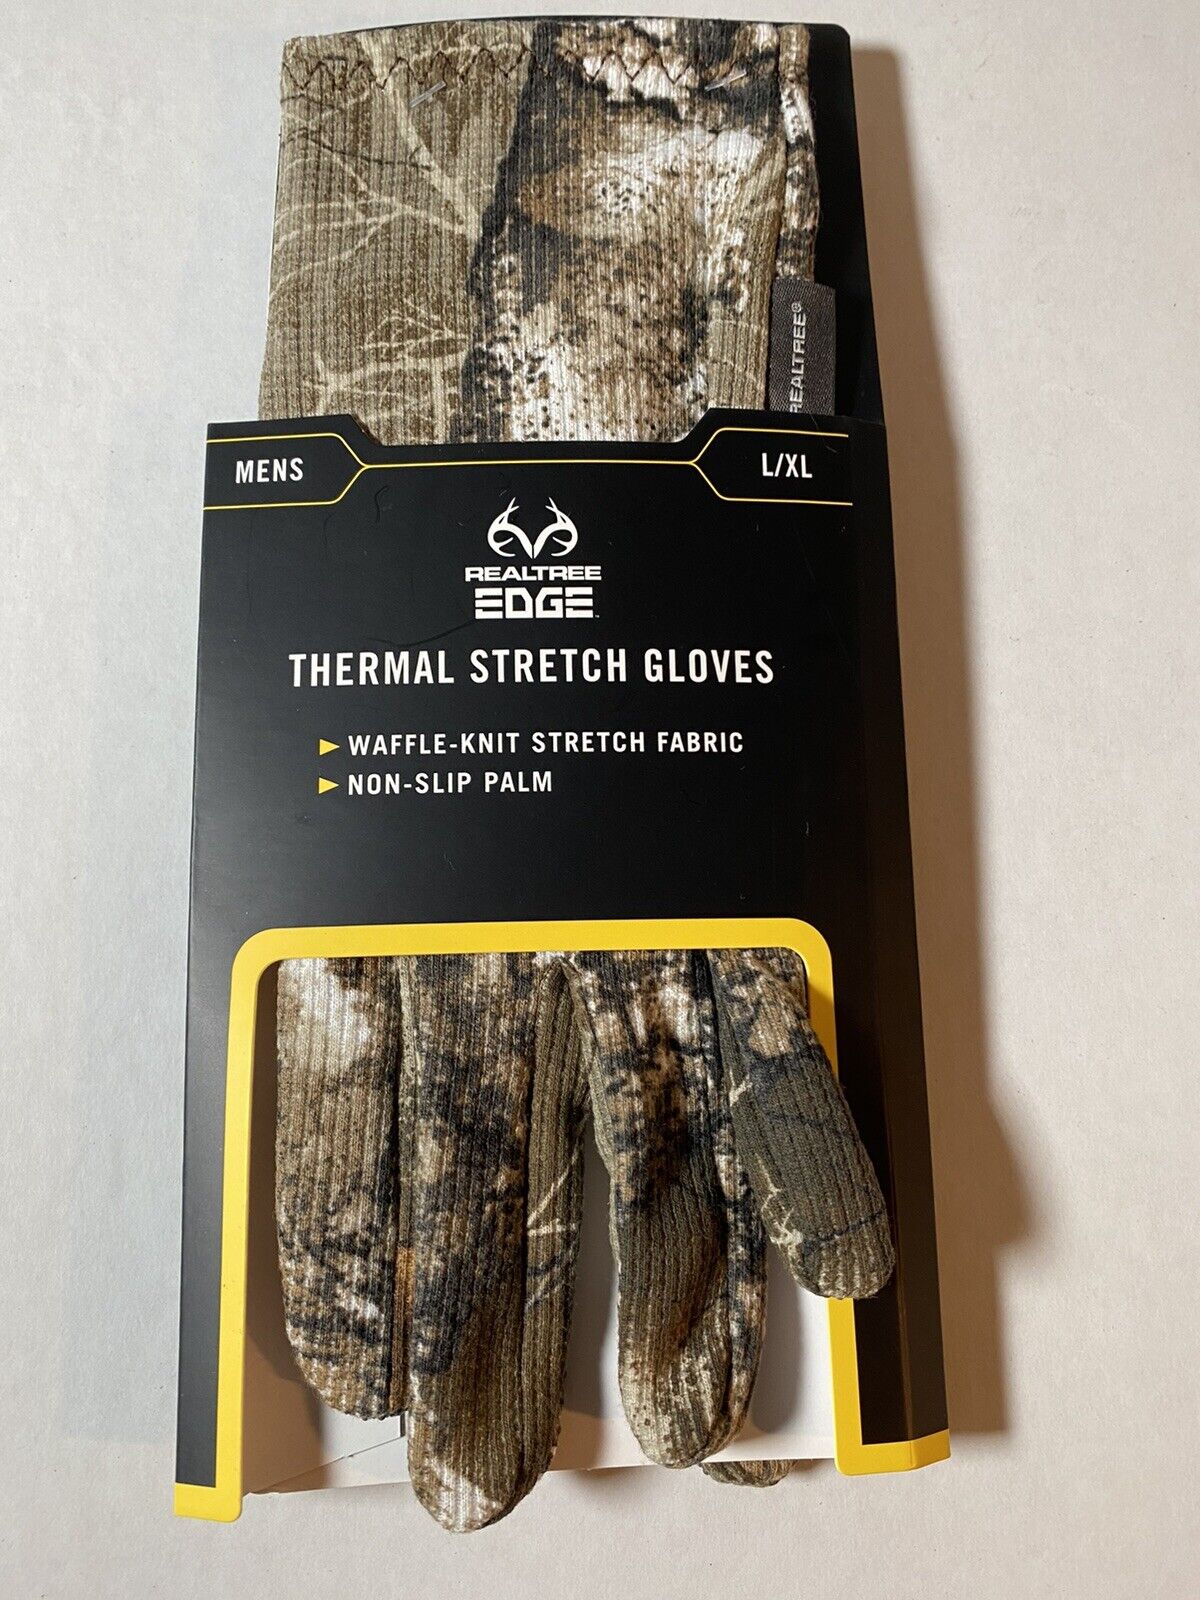 Realtree Edge Thermal Stretch Cheap mail order specialty store Gloves with Non-Slip Hun XL L Super sale period limited Palm